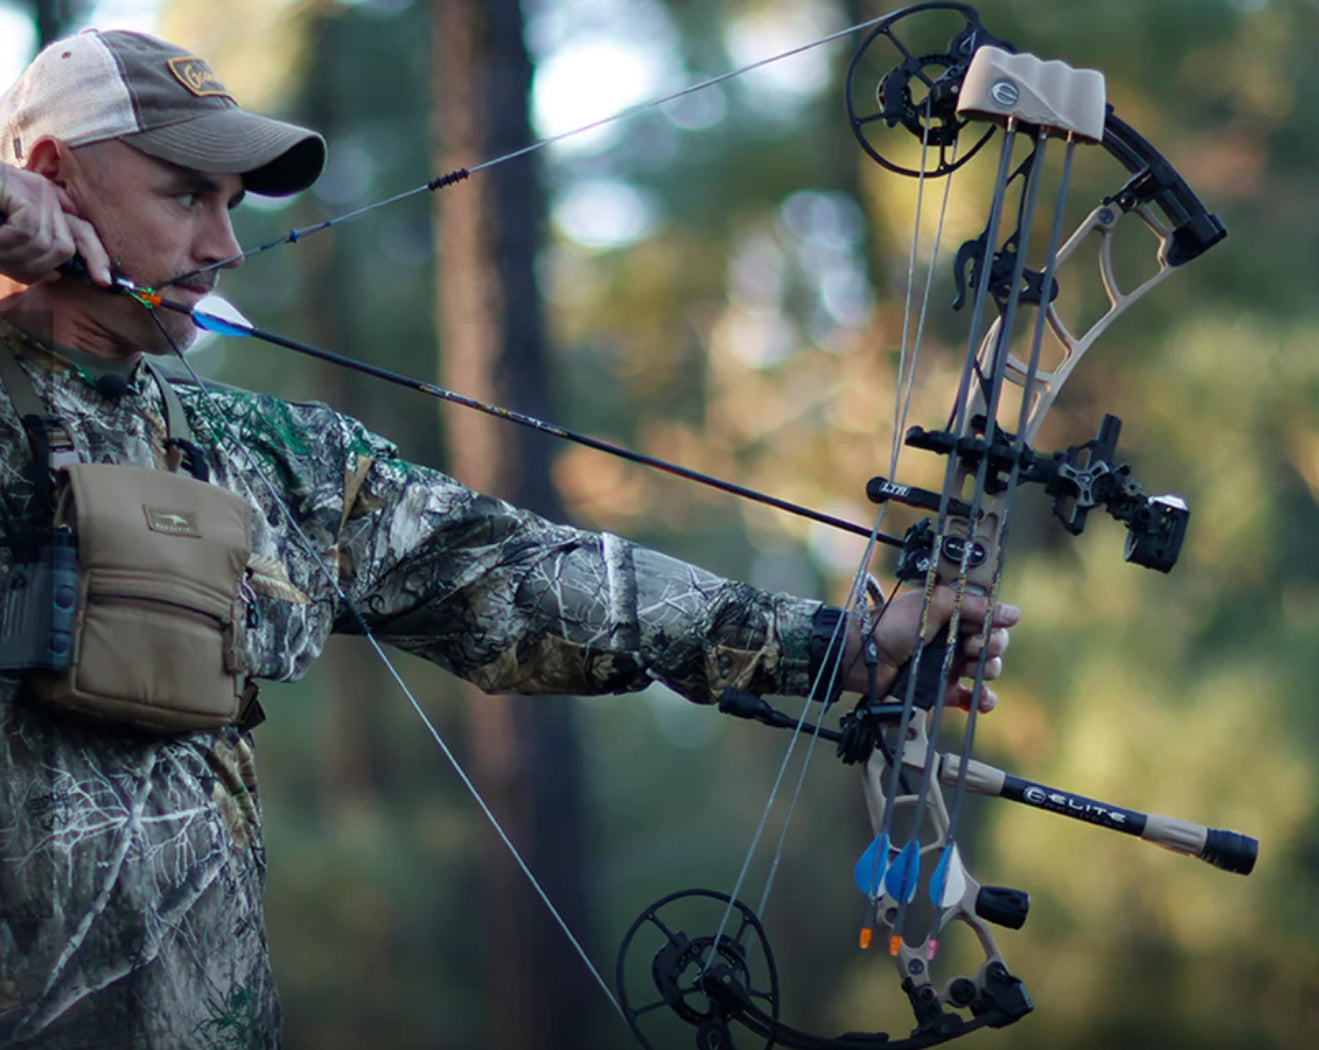 Elite Omnia Compound Bow | BEST VALUE Flagship by F&S | Uninterrupted Accuracy